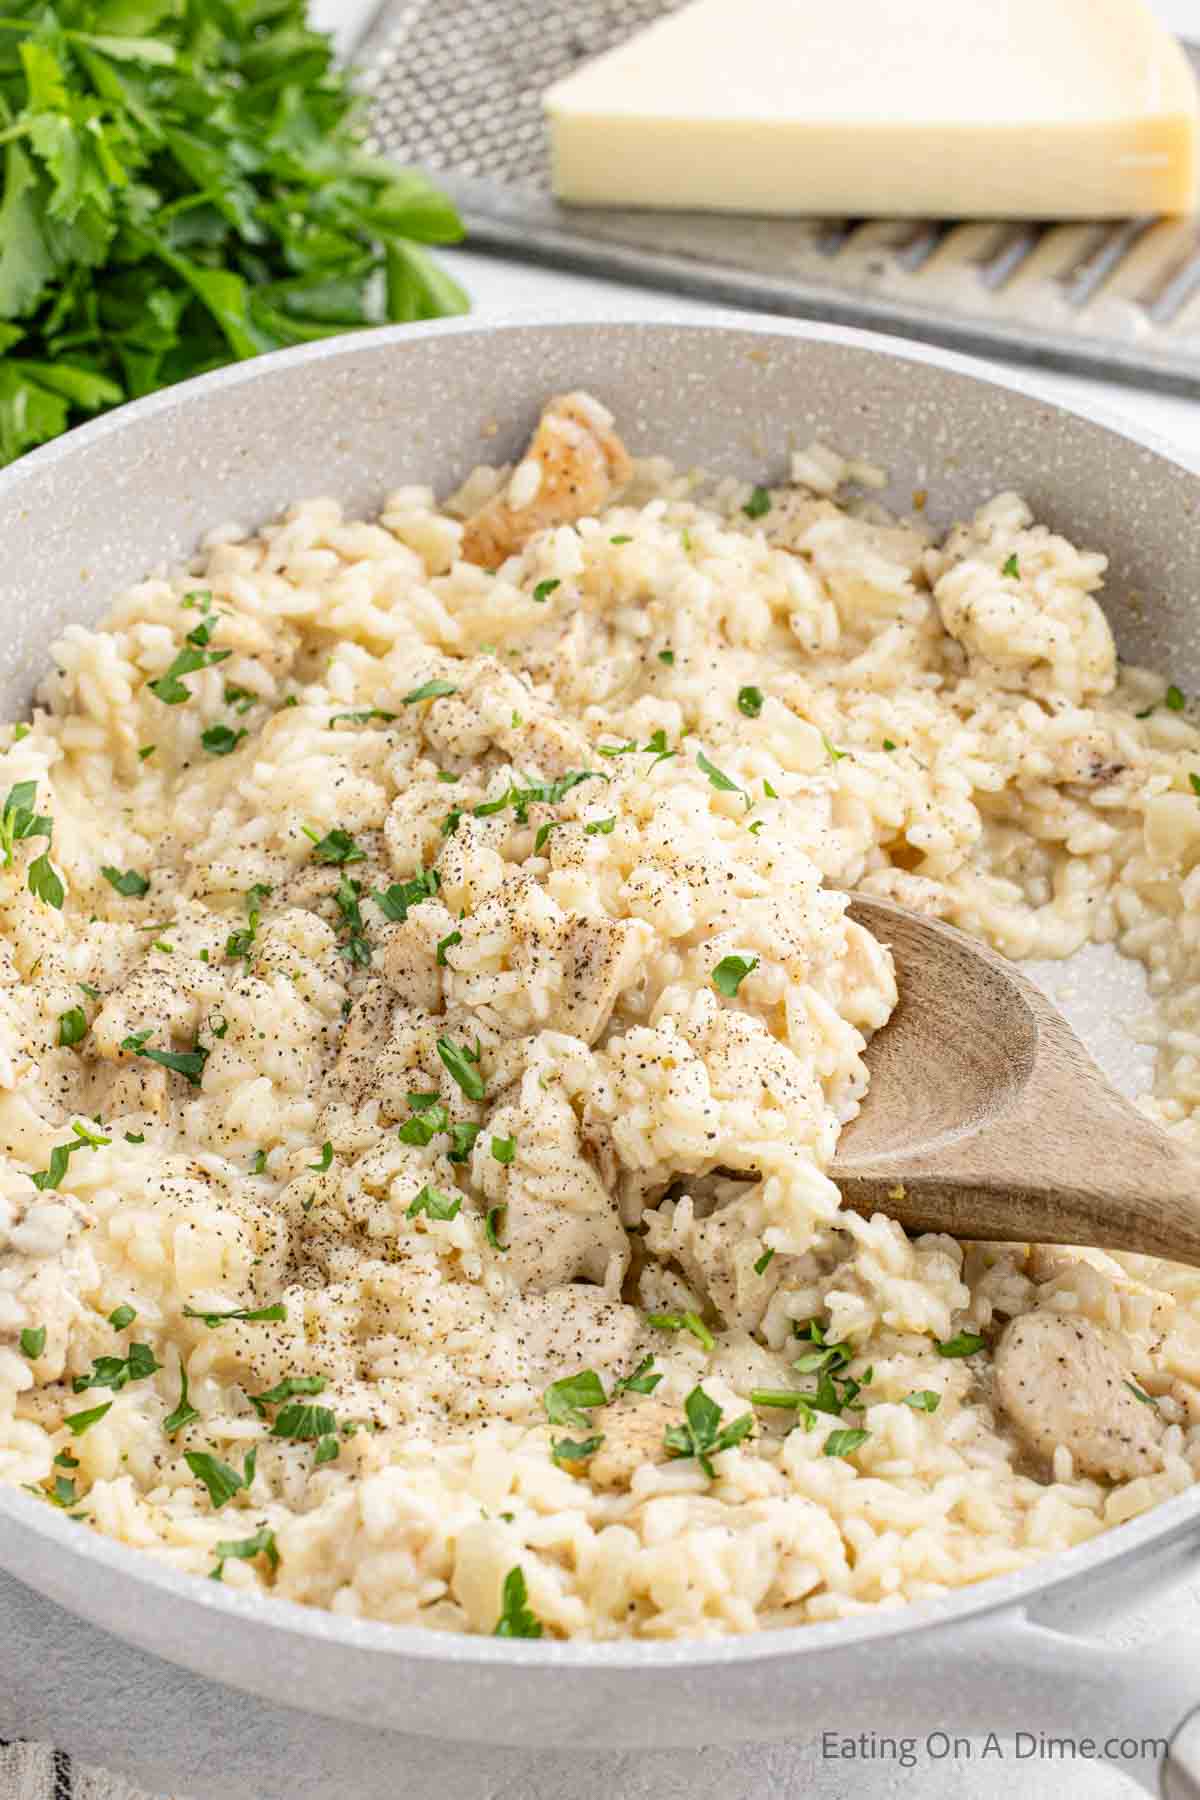 Four Cheese Risotto, The Authentic Italian Recipe - The Recipes Club